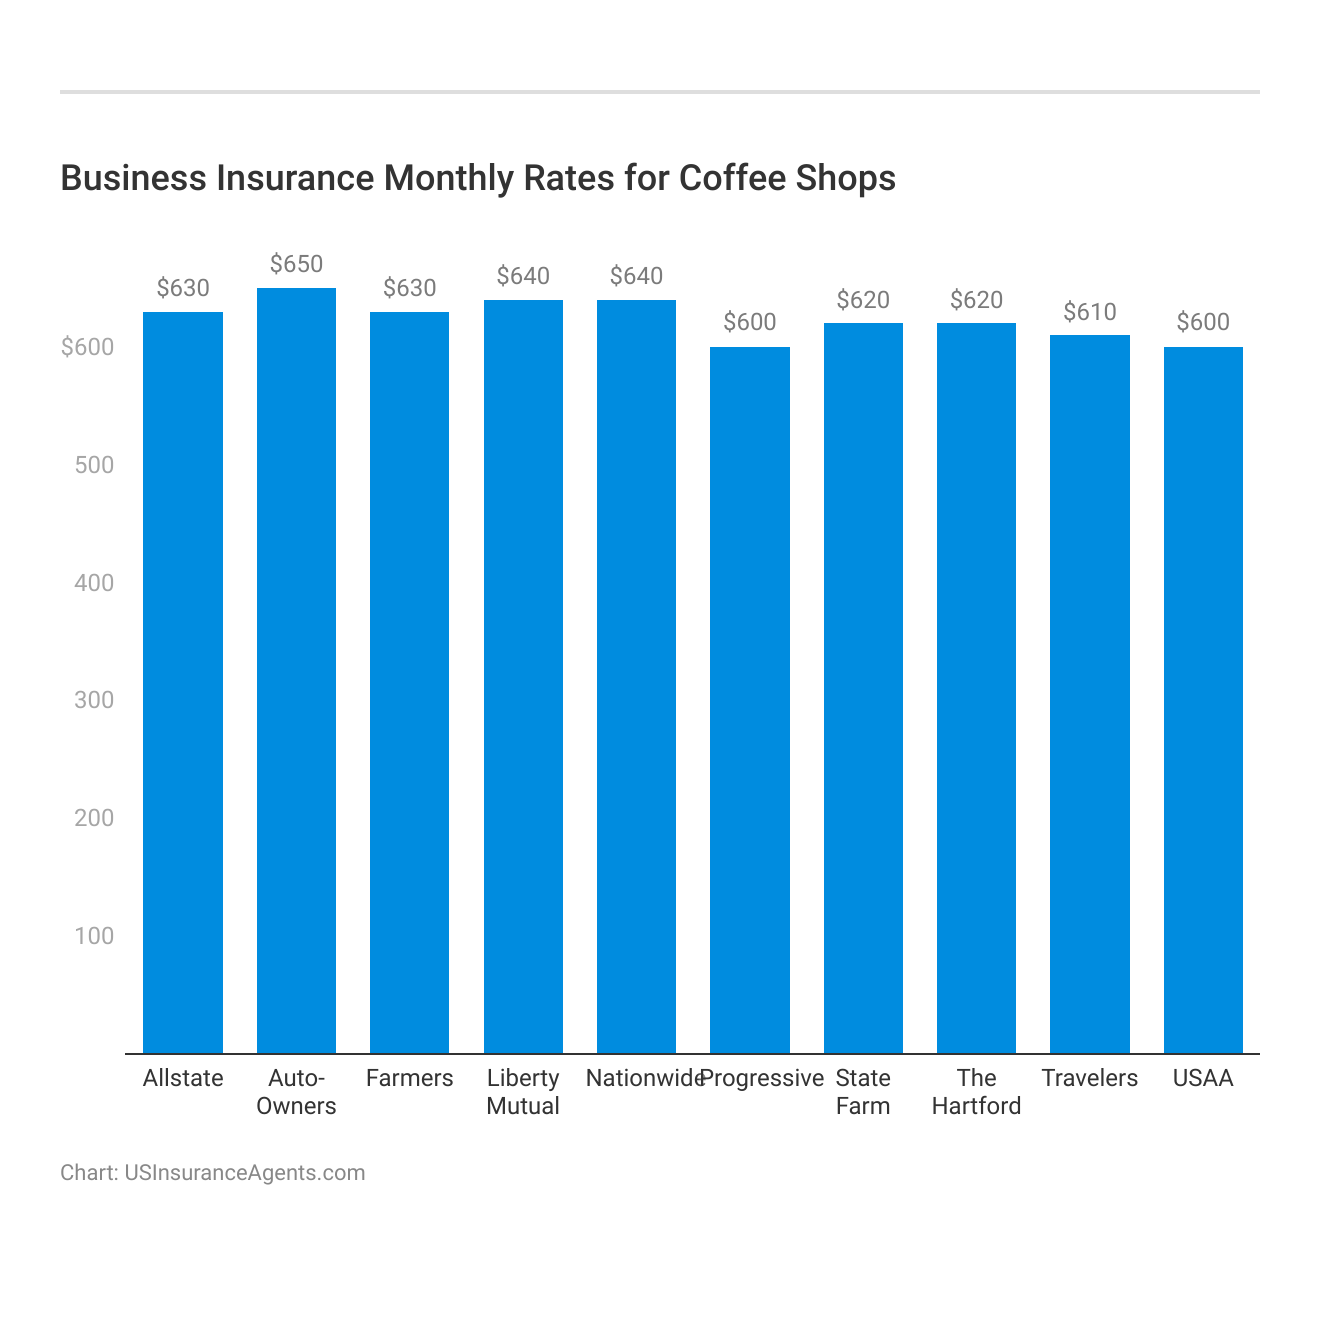 <h3>Business Insurance Monthly Rates for Coffee Shops</h3>